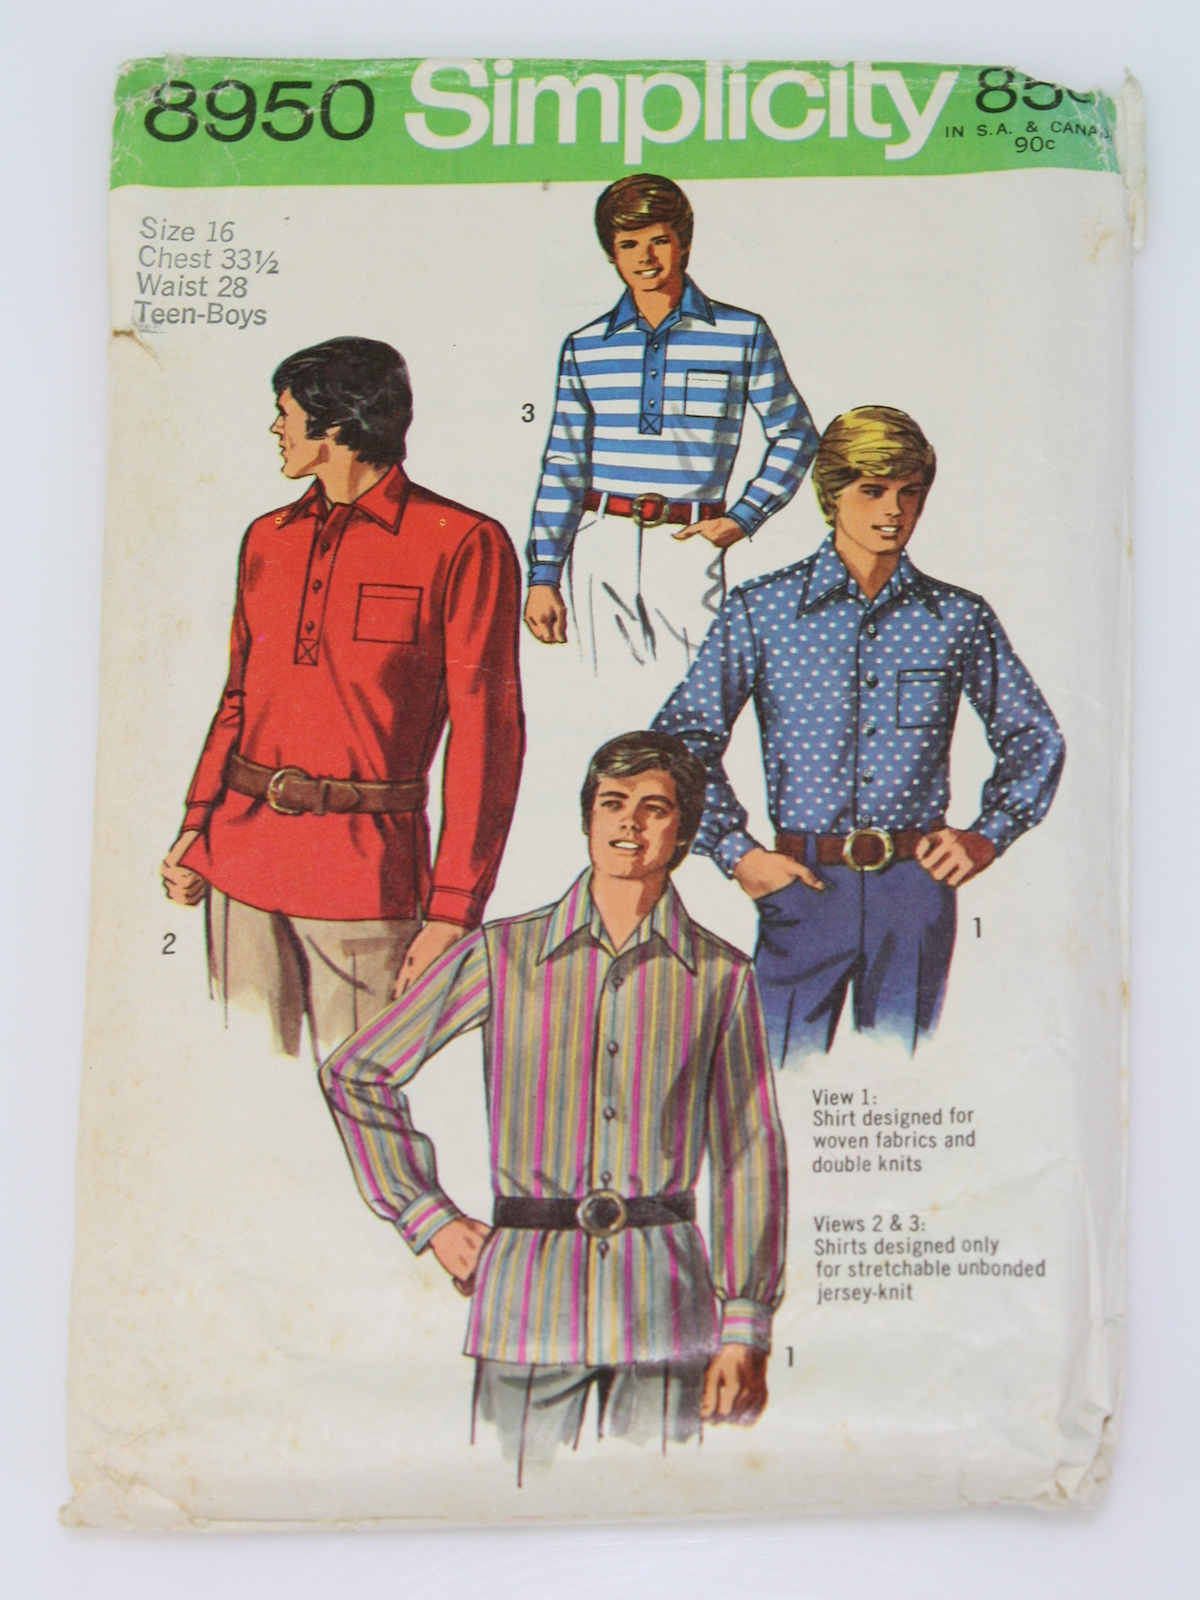 Mens Sewing Patterns 70s Sewing Pattern Simplicity 8950 1970 Simplicity ...